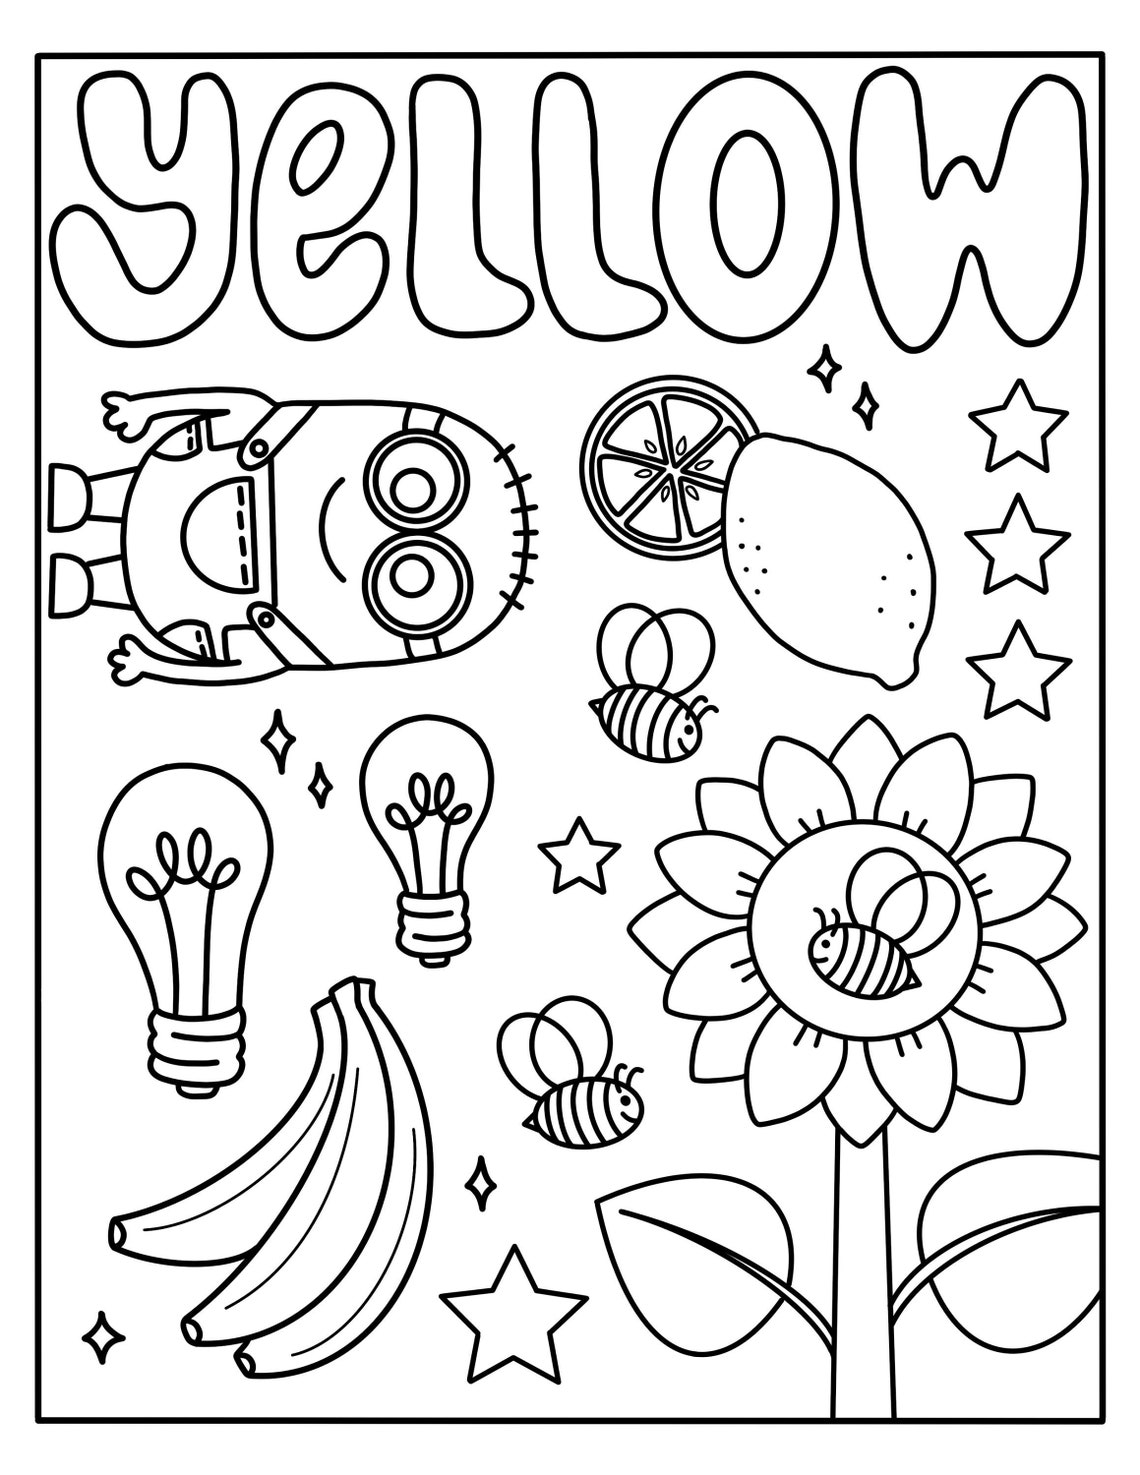 Things That Are Yellow Coloring Page Coloring Pages